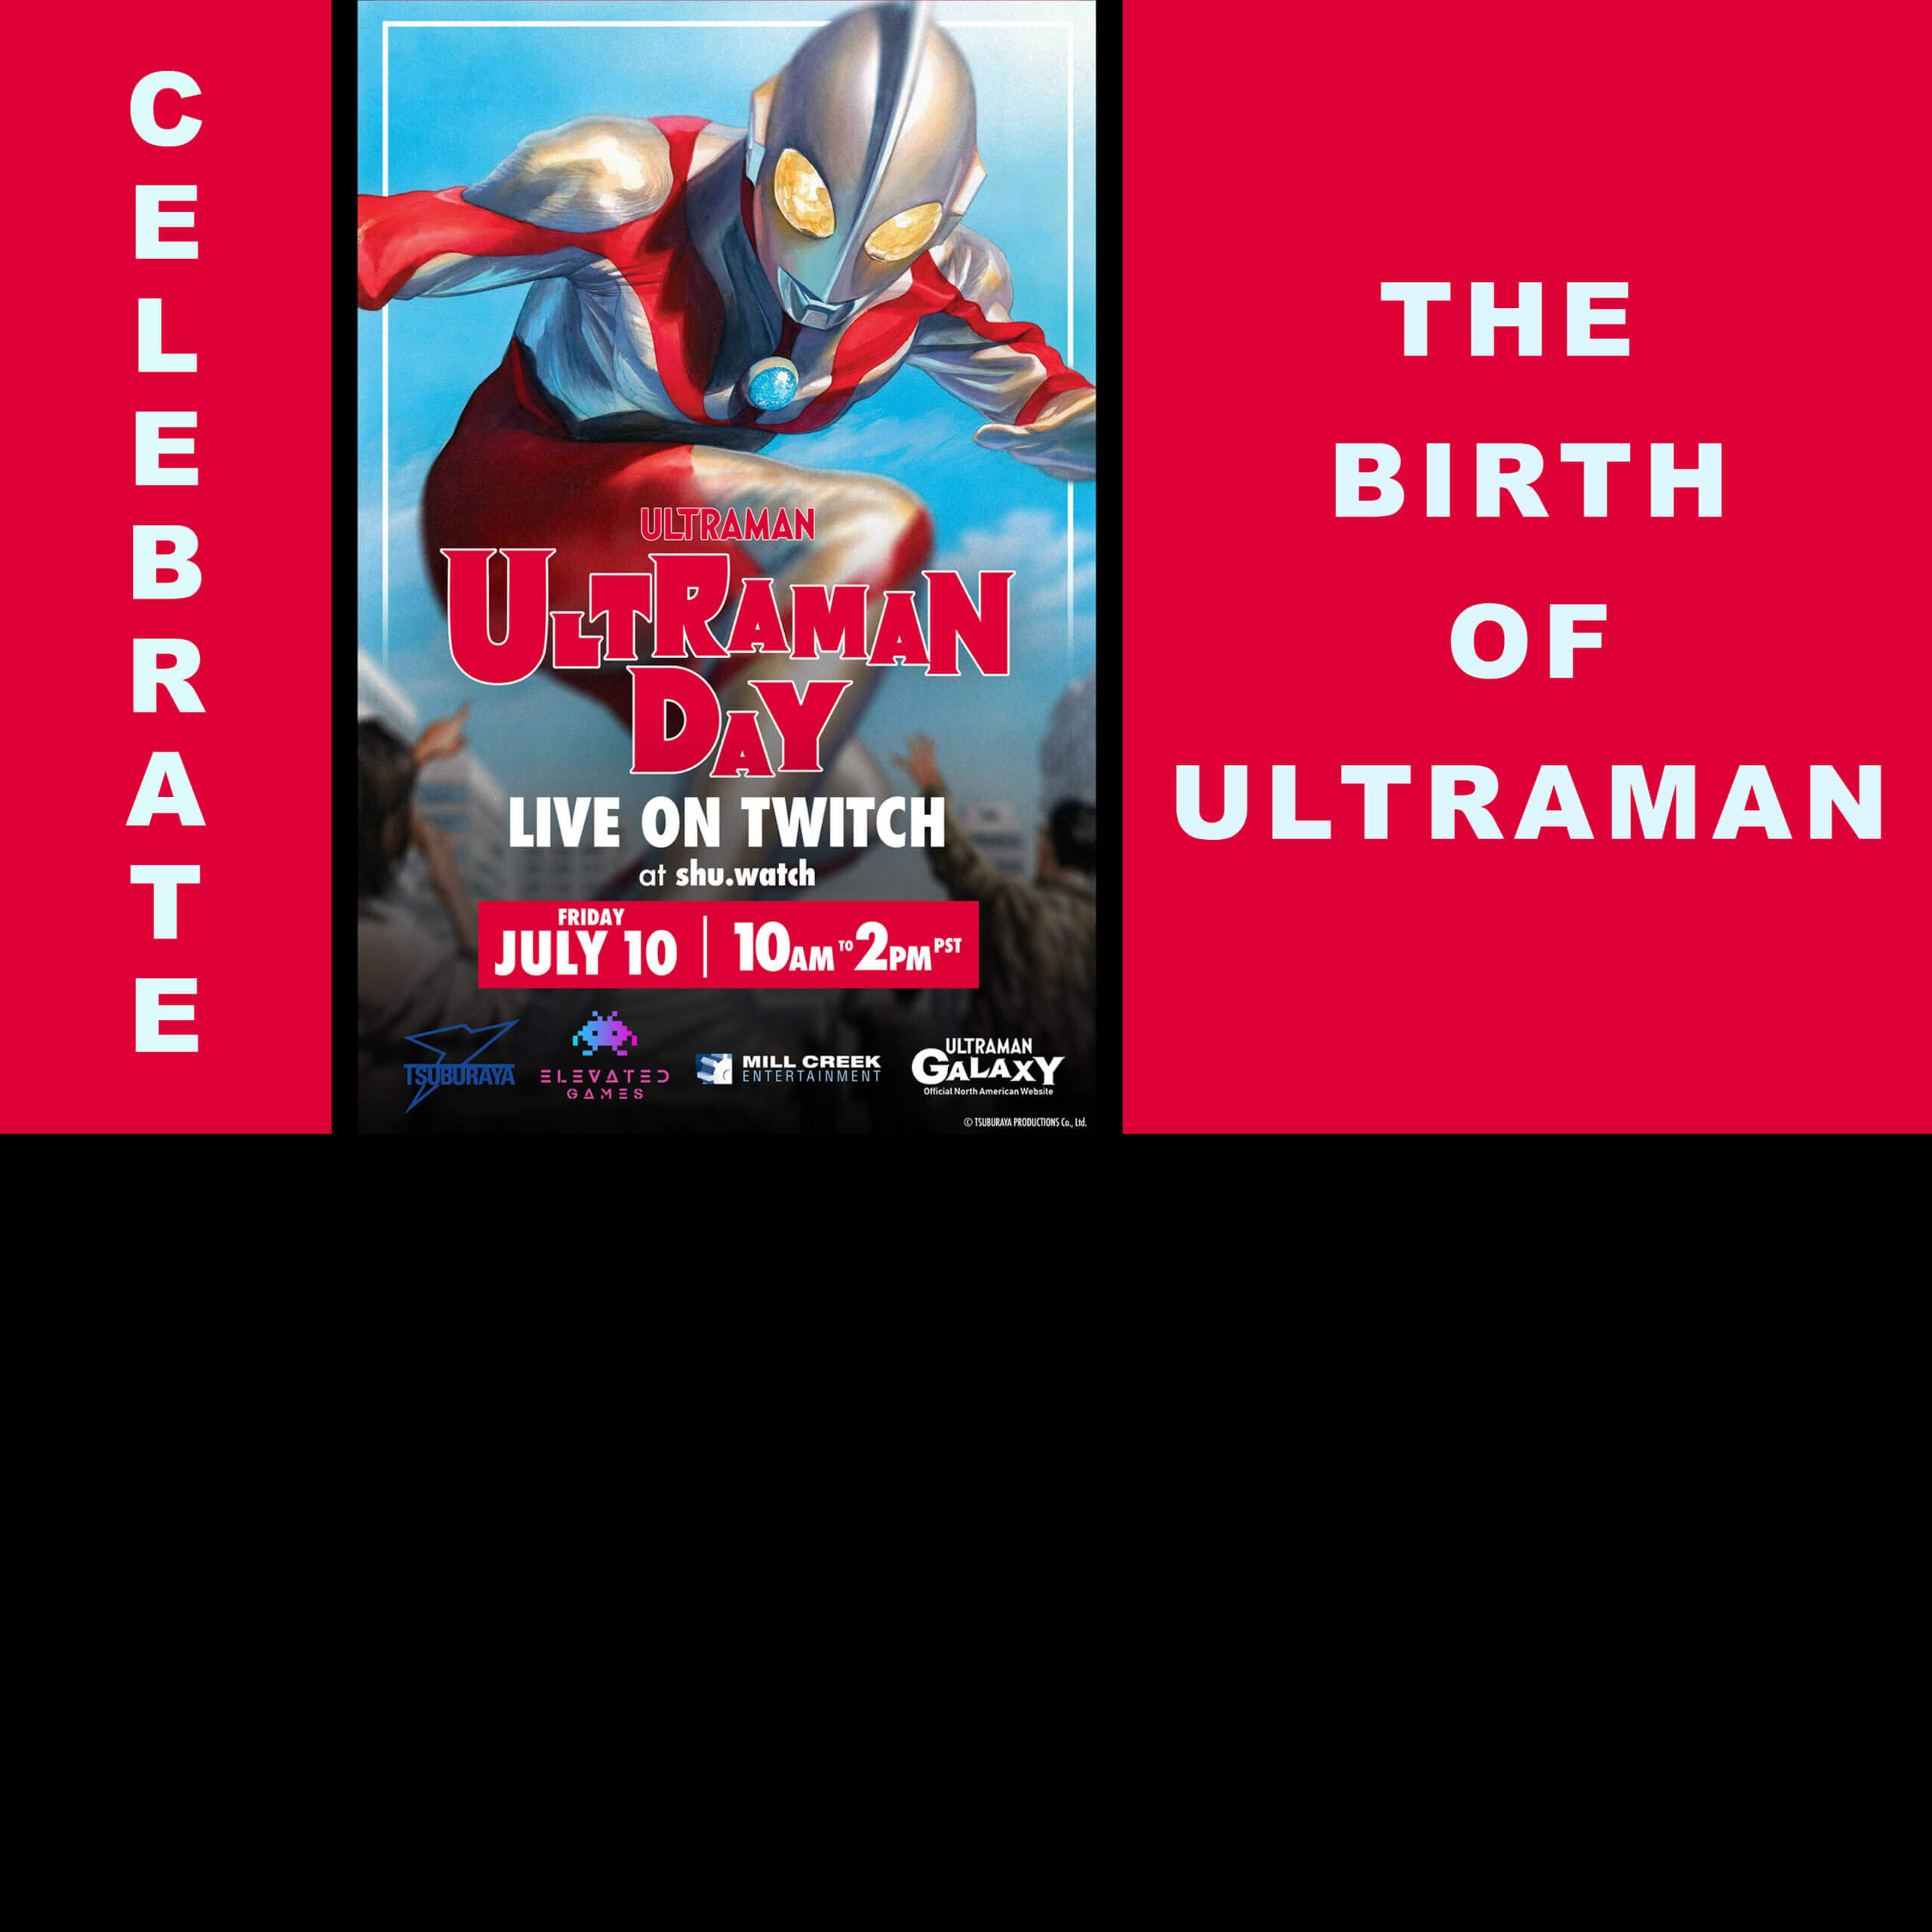 ULTRAMAN DAY TO BE FILLED WITH BIG ANNOUNCEMENTS JULY 10, 2020